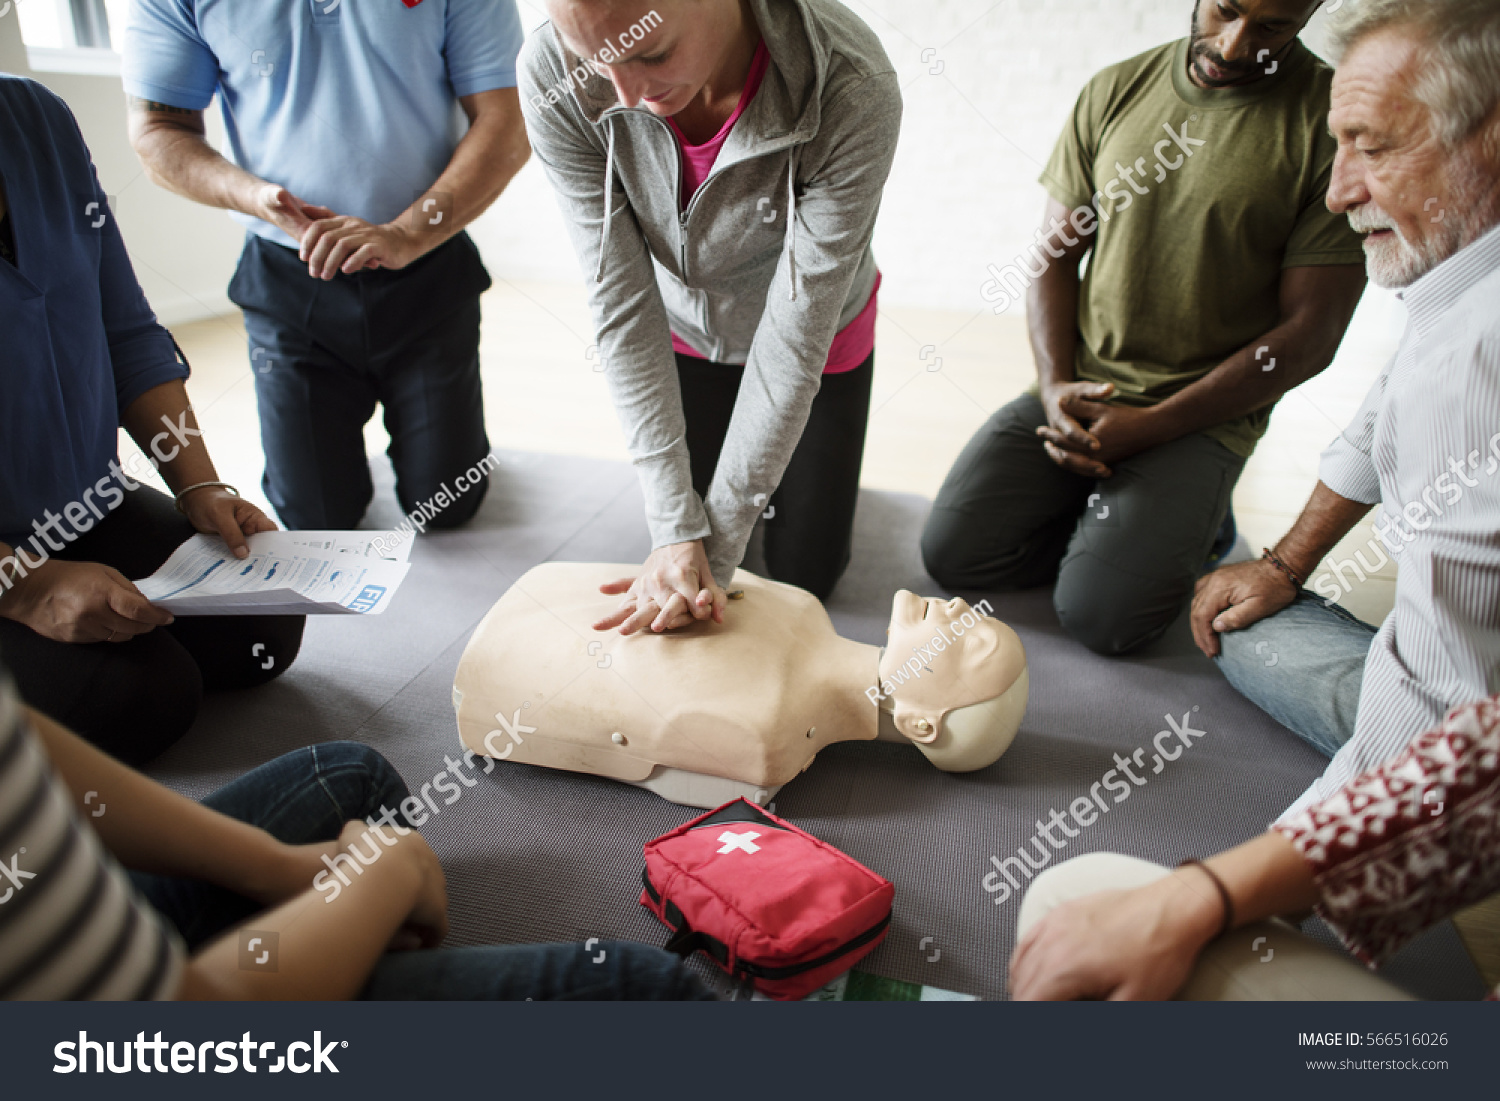 CPR First Aid Training Concept #566516026